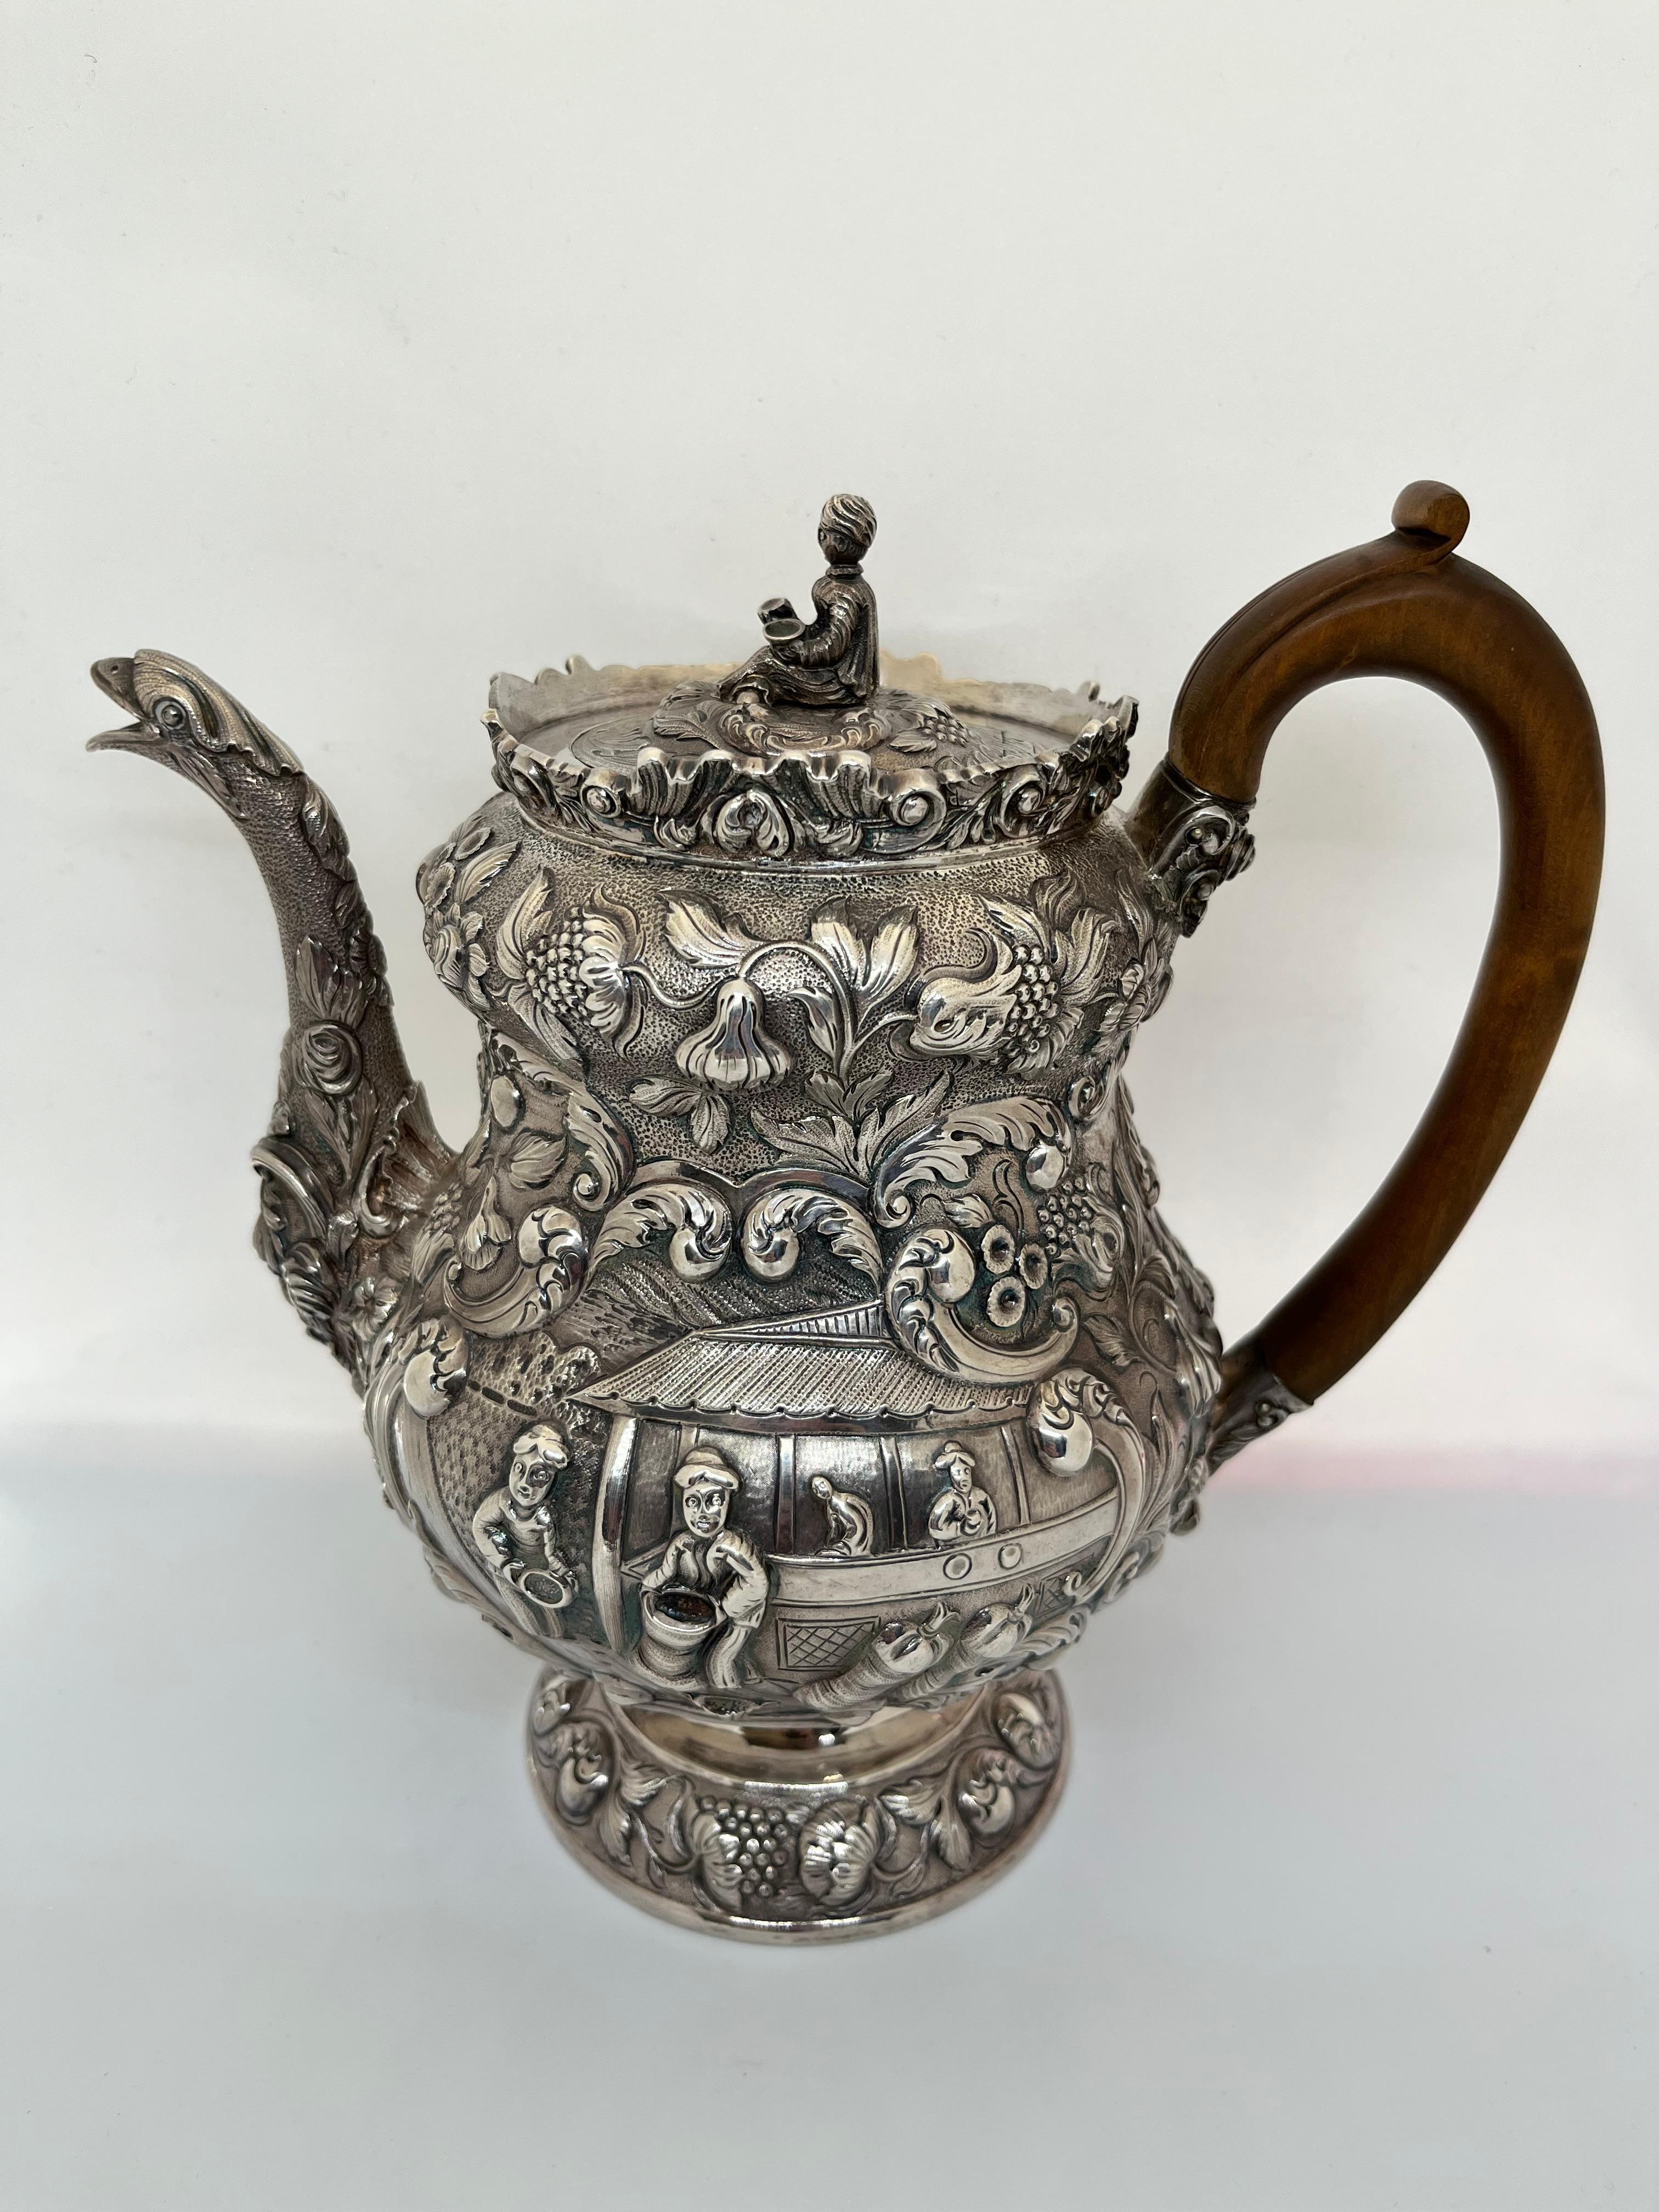 Repoussé George IV Silver Tea or Coffee Pot Decorated with the Chinese Tea Harvest